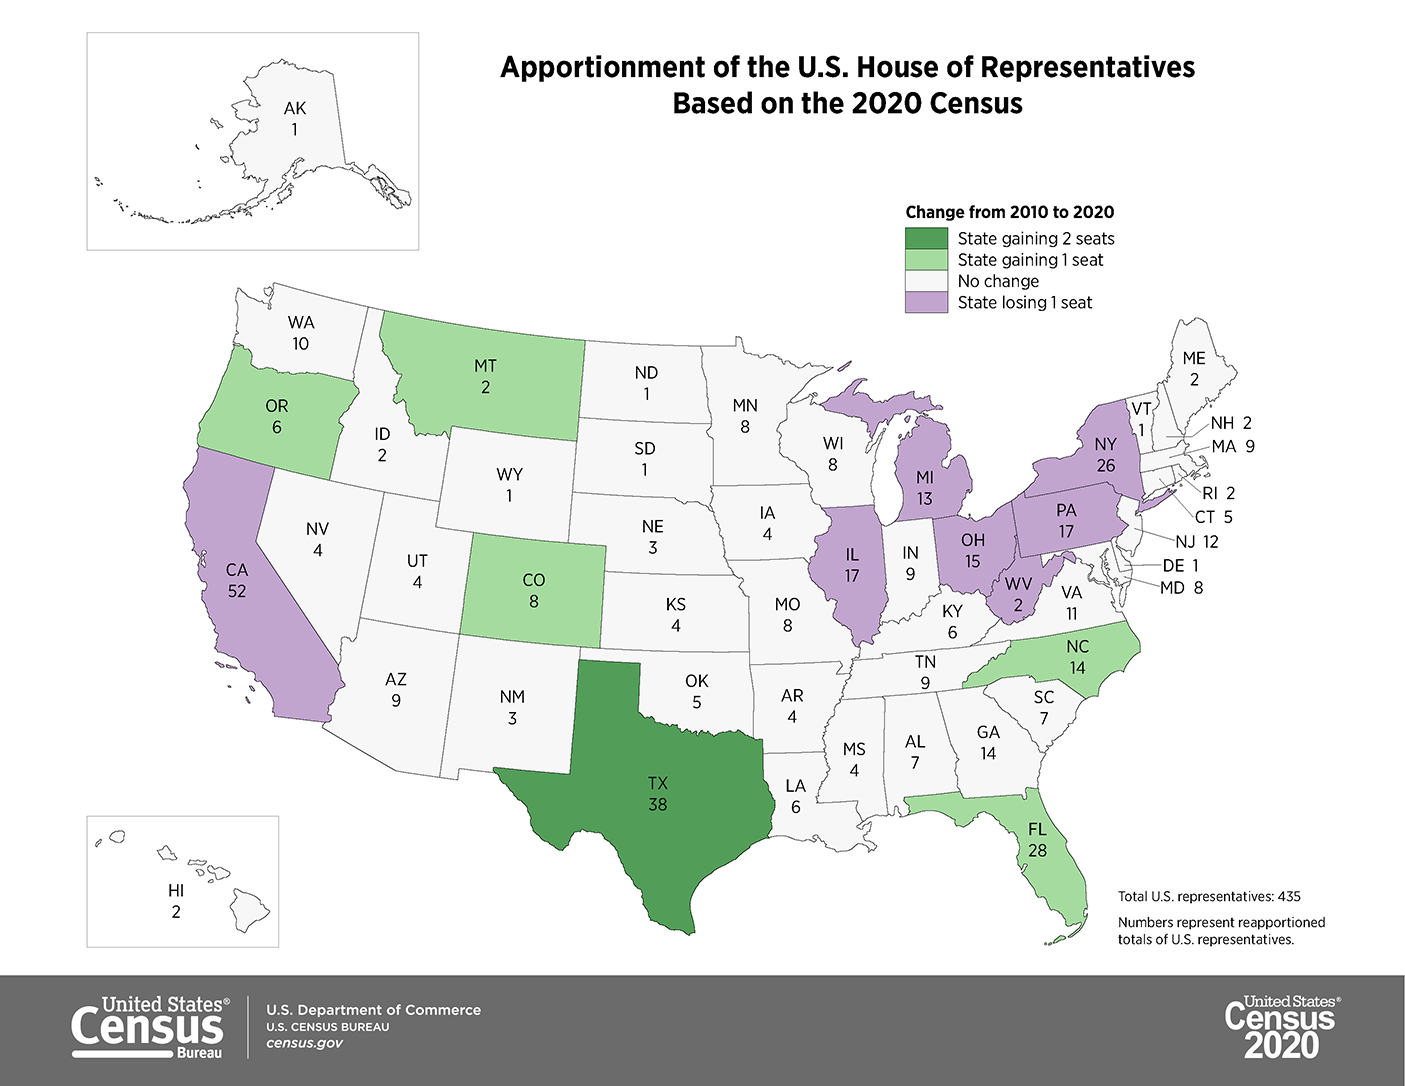 A map showing the apportionment of the U.S. House of Representatives based on the 2020 Census